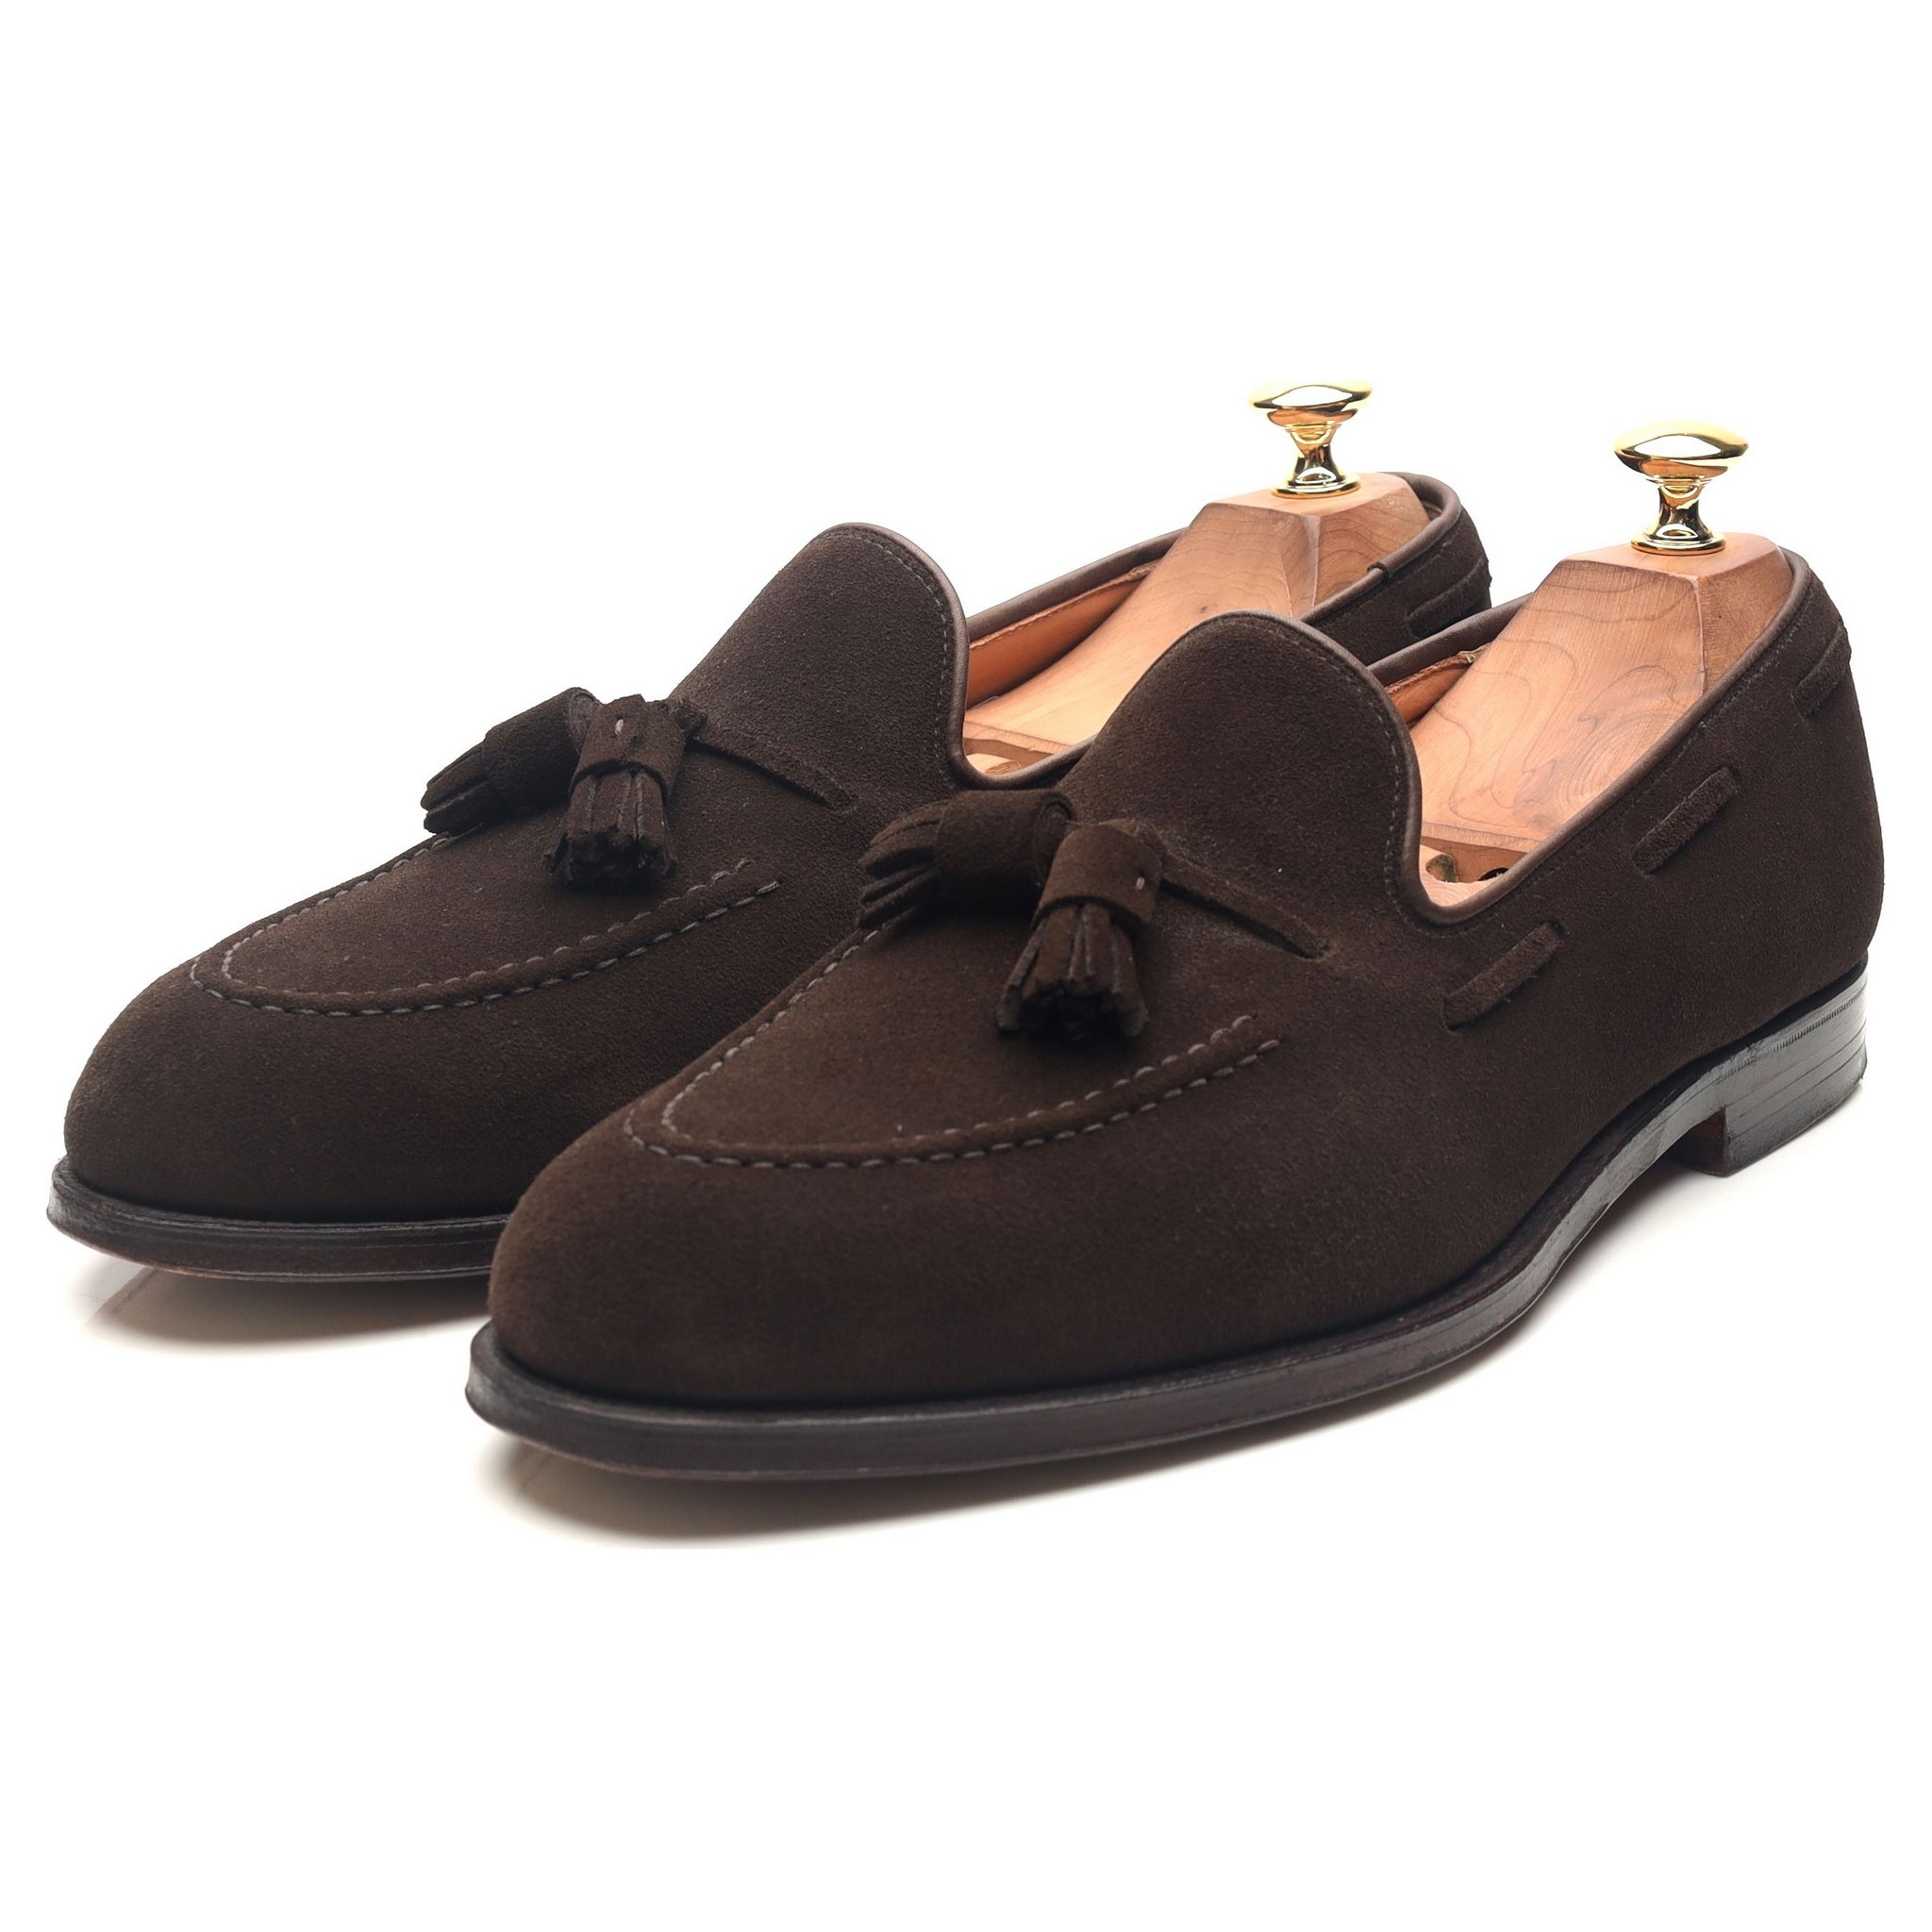 Cavendish 2' Dark Brown Suede Tassel Loafers UK 9 E - Abbot's Shoes